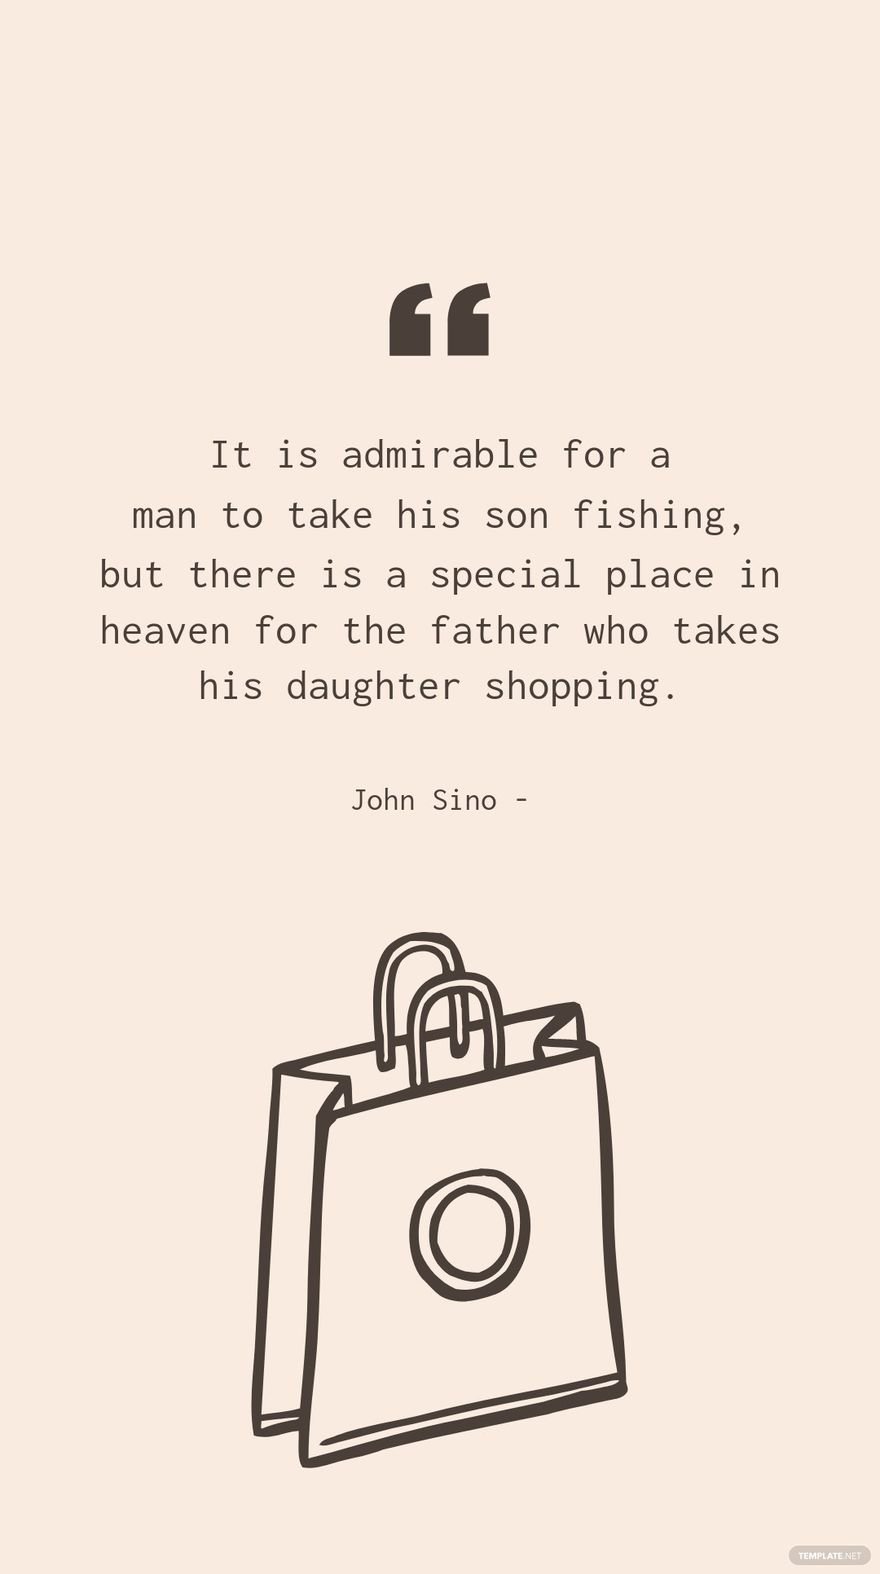 John Sino - It is admirable for a man to take his son fishing, but there is a special place in heaven for the father who takes his daughter shopping.